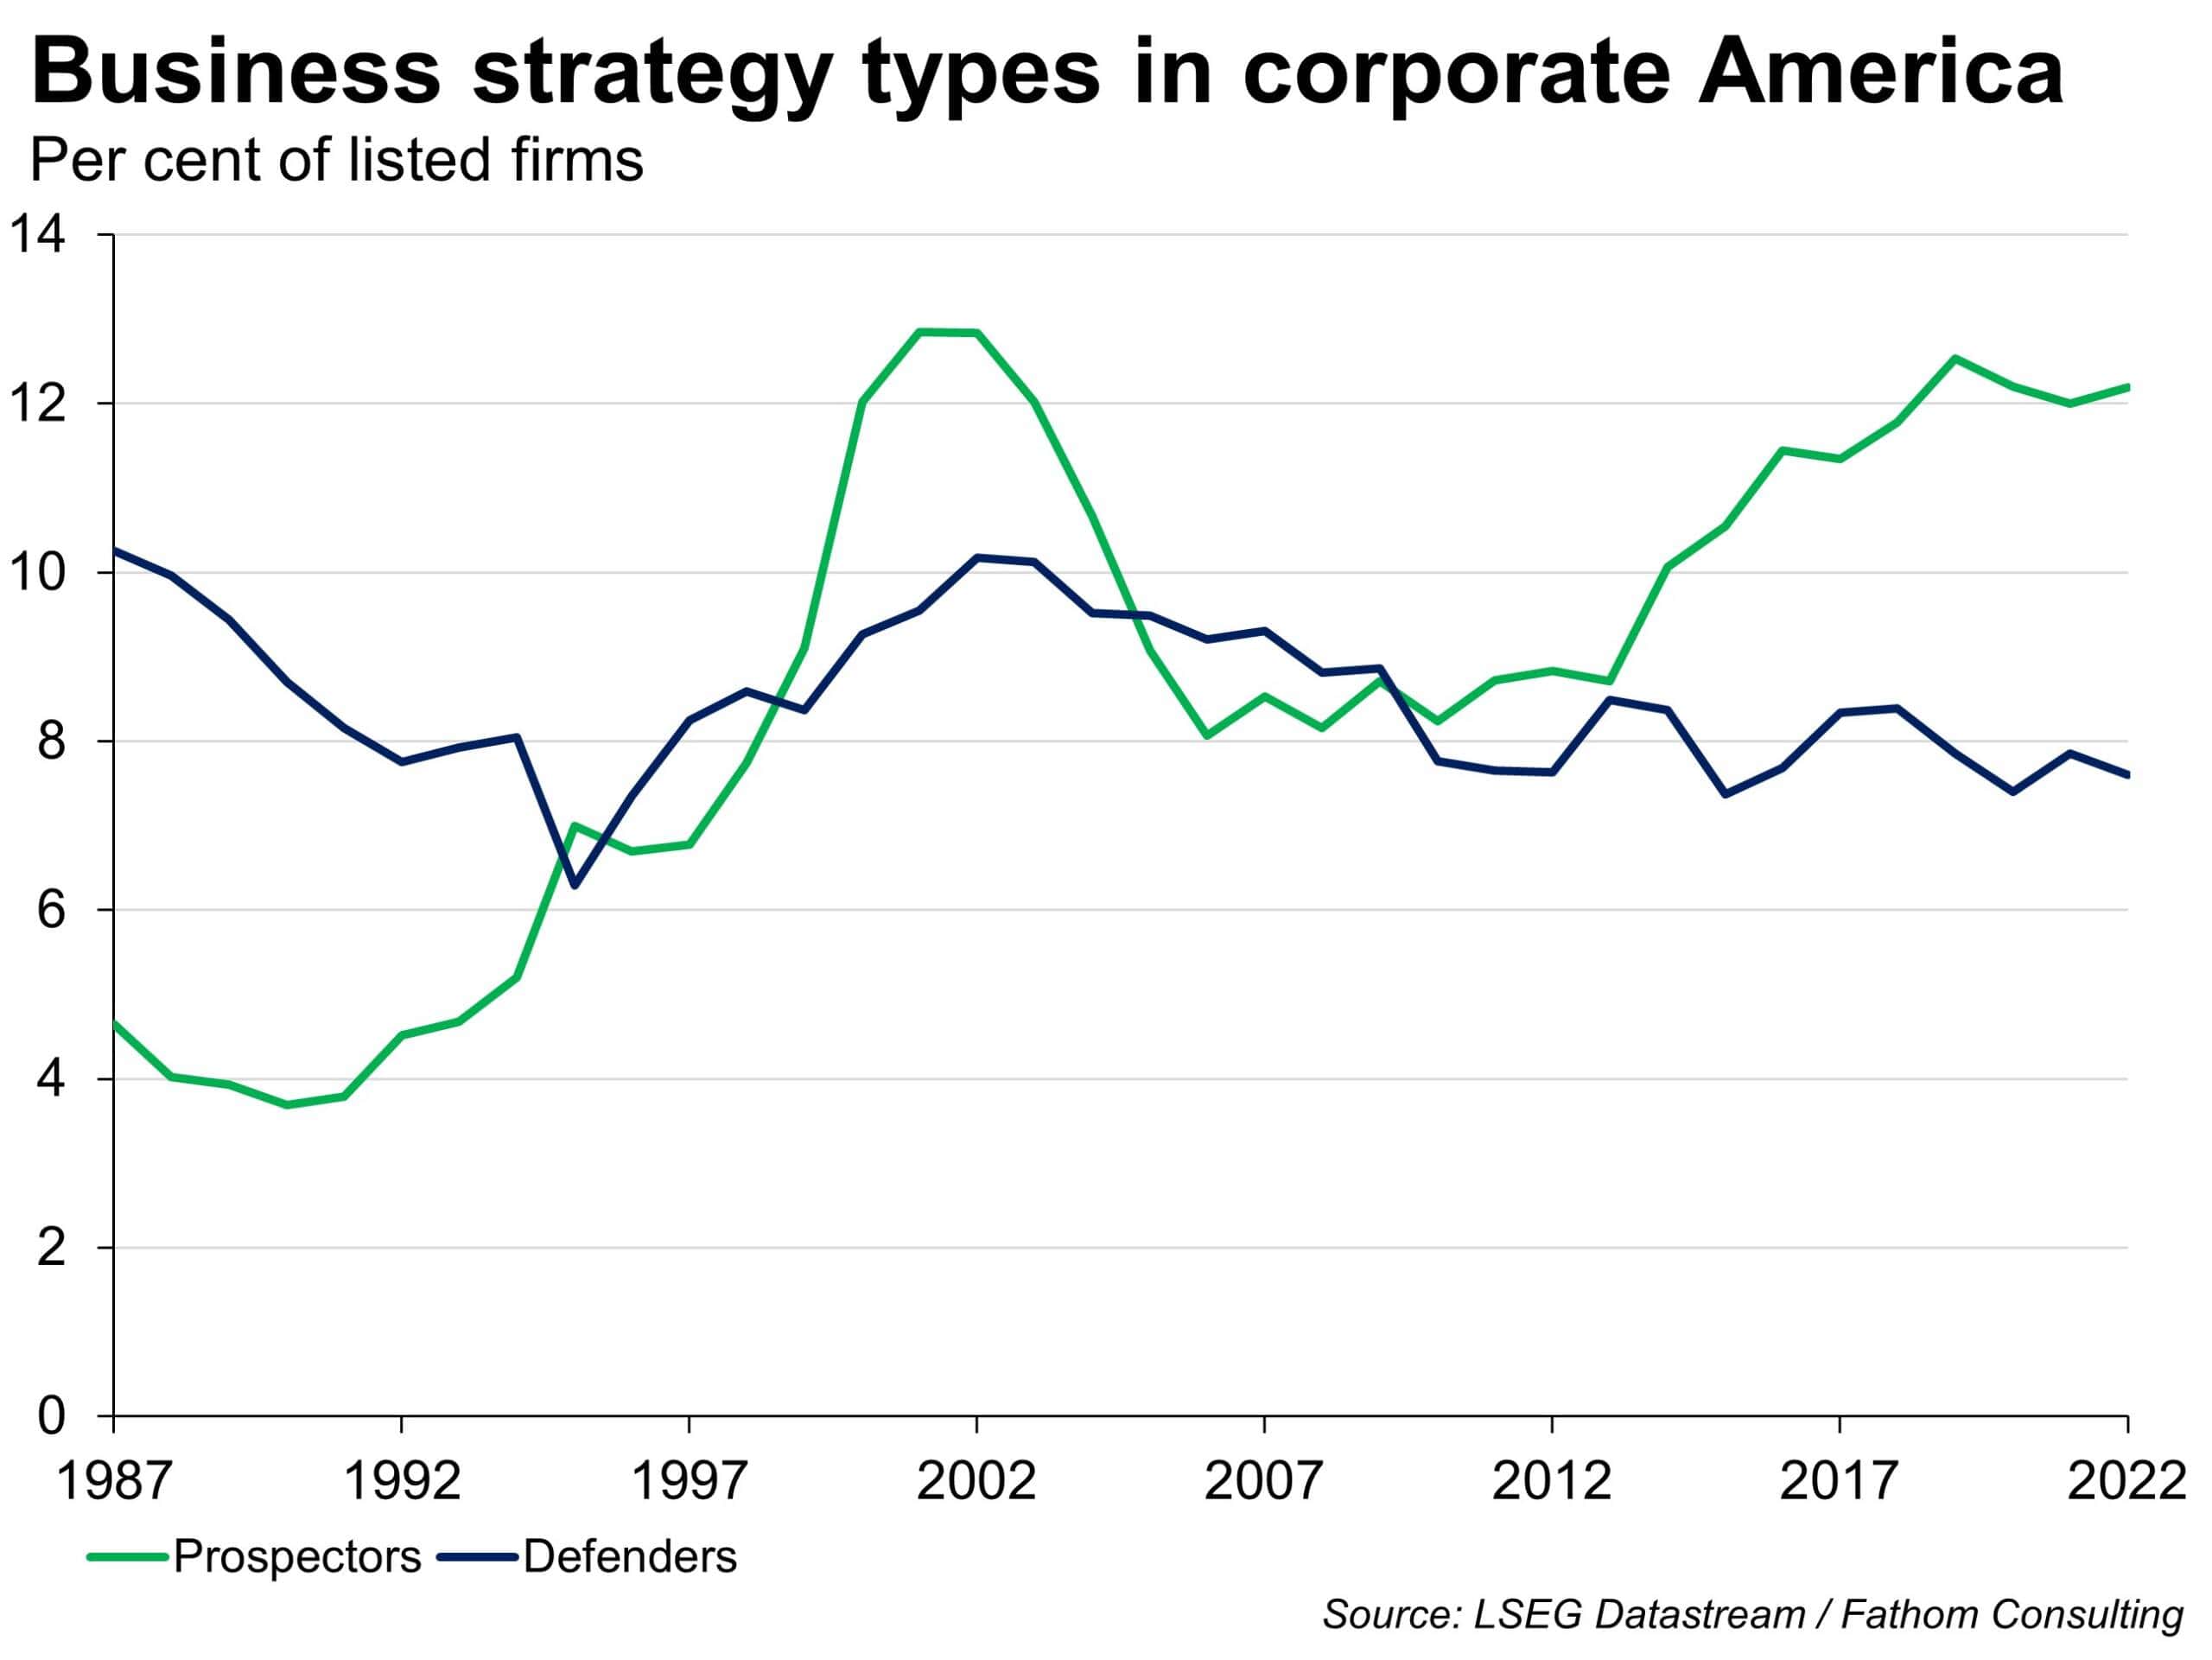 Business strategy types in corporate America, by Prospectors and Defenders from 1987 to 2022, as pre cent of listed firms